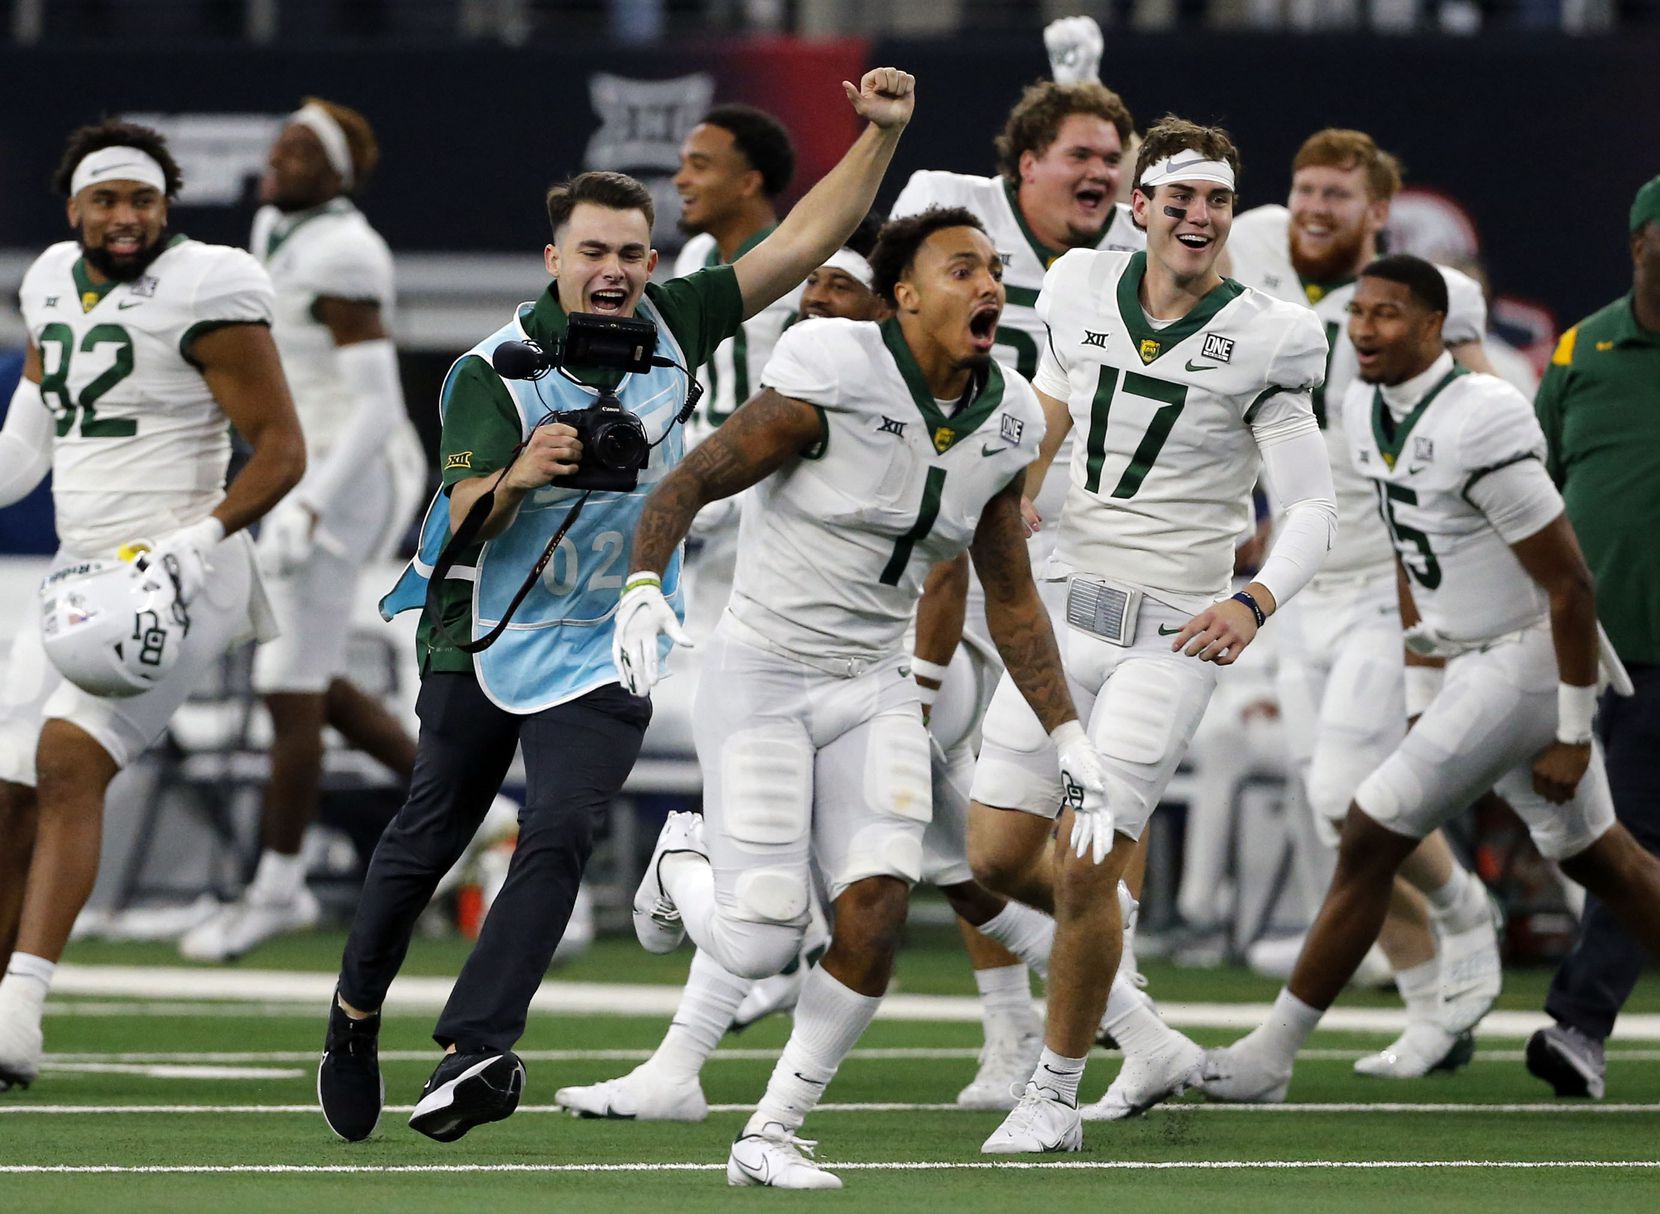 A school photographer (blue smock) celebrates with Baylor Bears running back Trestan Ebner (1) and the remainder of the Baylor bench at the end of  the Big 12 Championship football game against Oklahoma State at AT&T Stadium in Arlington on Saturday, December 4, 2021. Baylor won 21-16. (John F. Rhodes / Special Contributor)